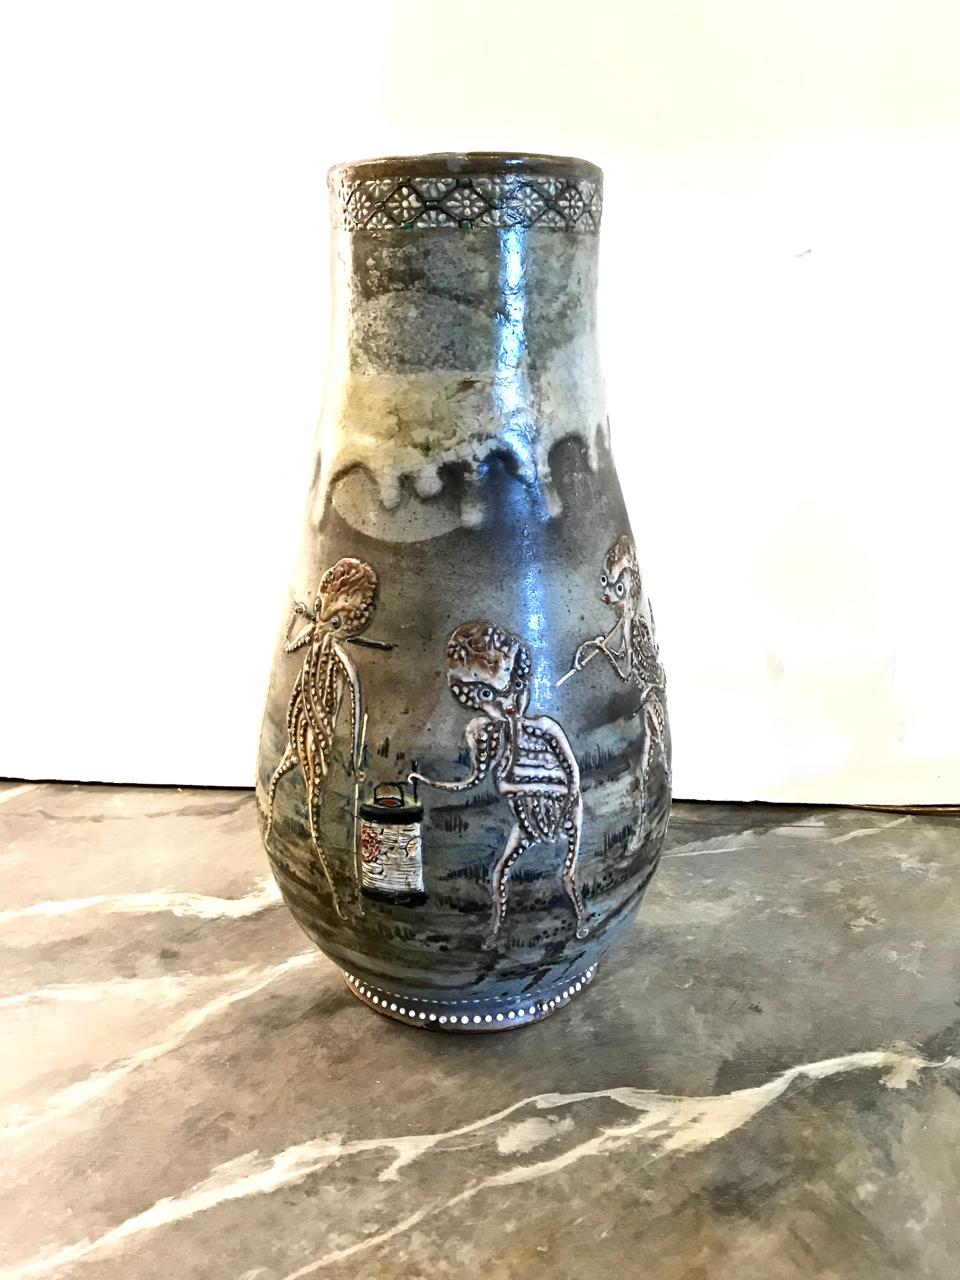 This is a stunning 20th century Japanese Studio Pottery vase. The rendering of the pottery shows direct influences of the Satsuma potting tradition; the anthropomorphized octopus figures are highly unusual and beautifully depicted. Although